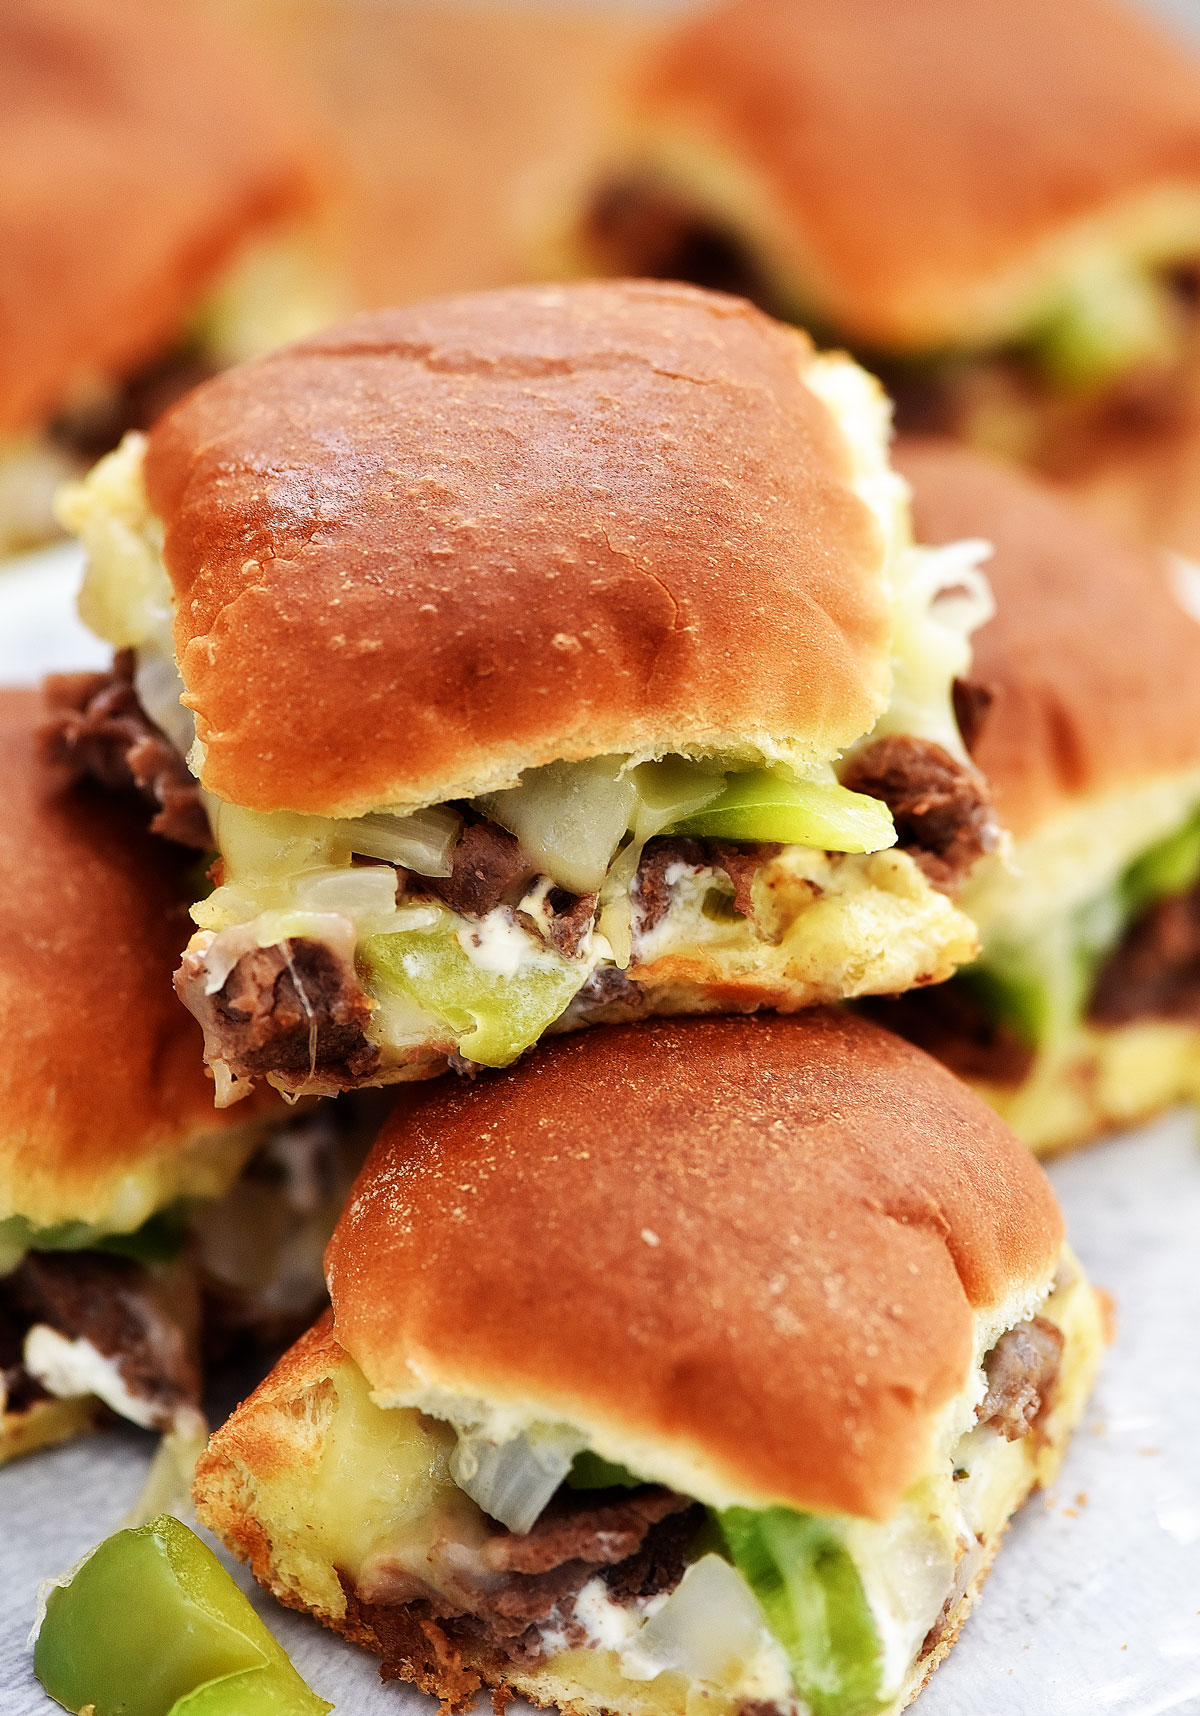 Cheesesteak Sliders are filled with warm pieces of steak, gooey cheese, peppers and onion. Life-in-the-Lofthouse.com